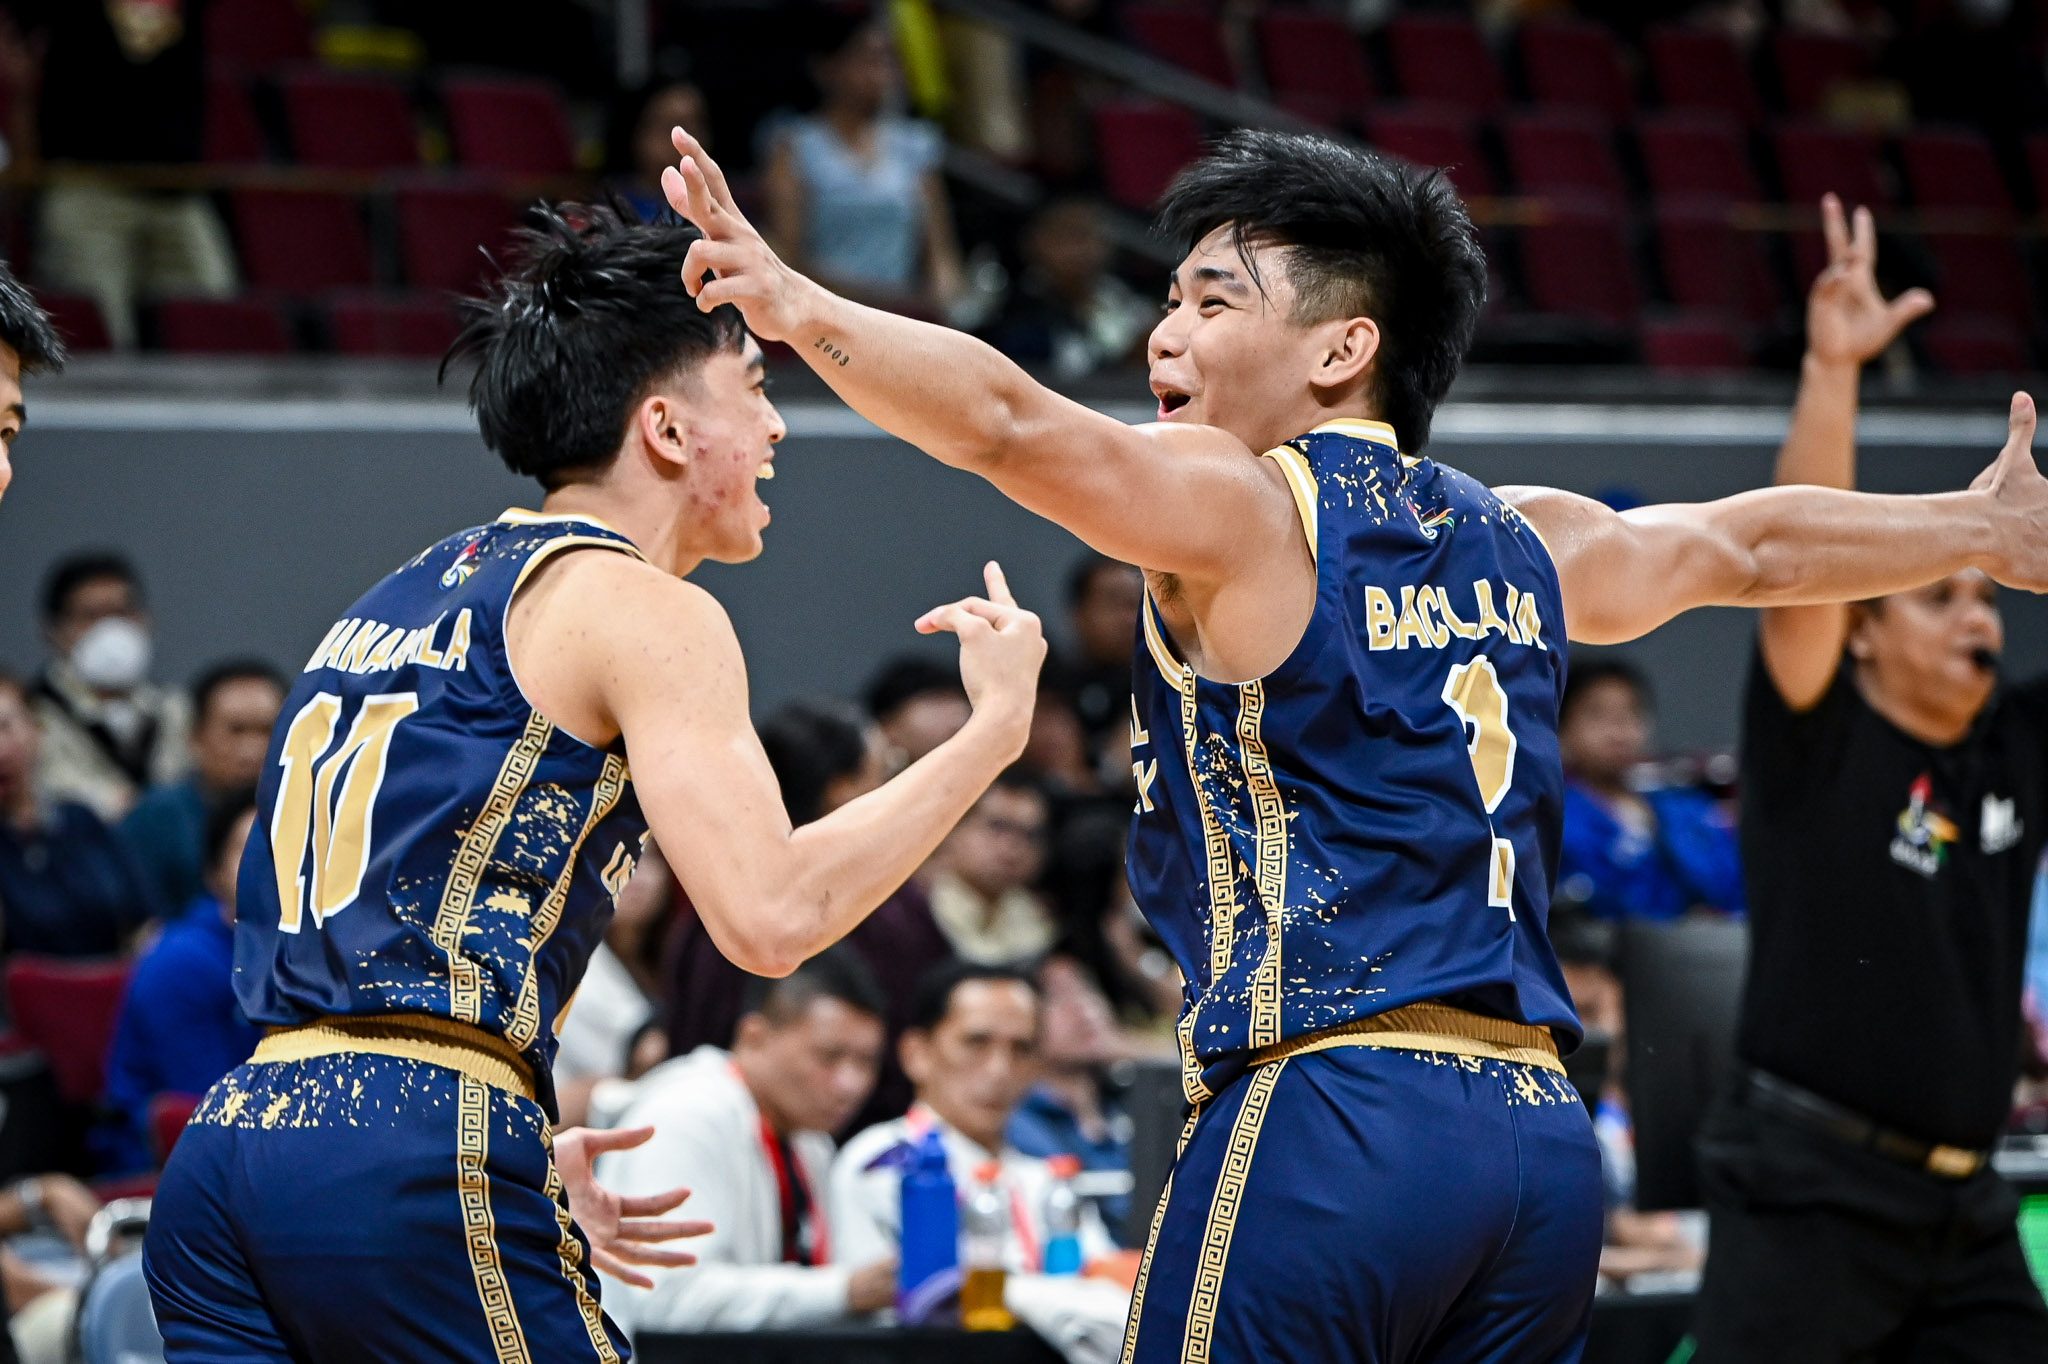 NU blowout over UAAP champion Ateneo still ‘meaningless,’ says coach Napa